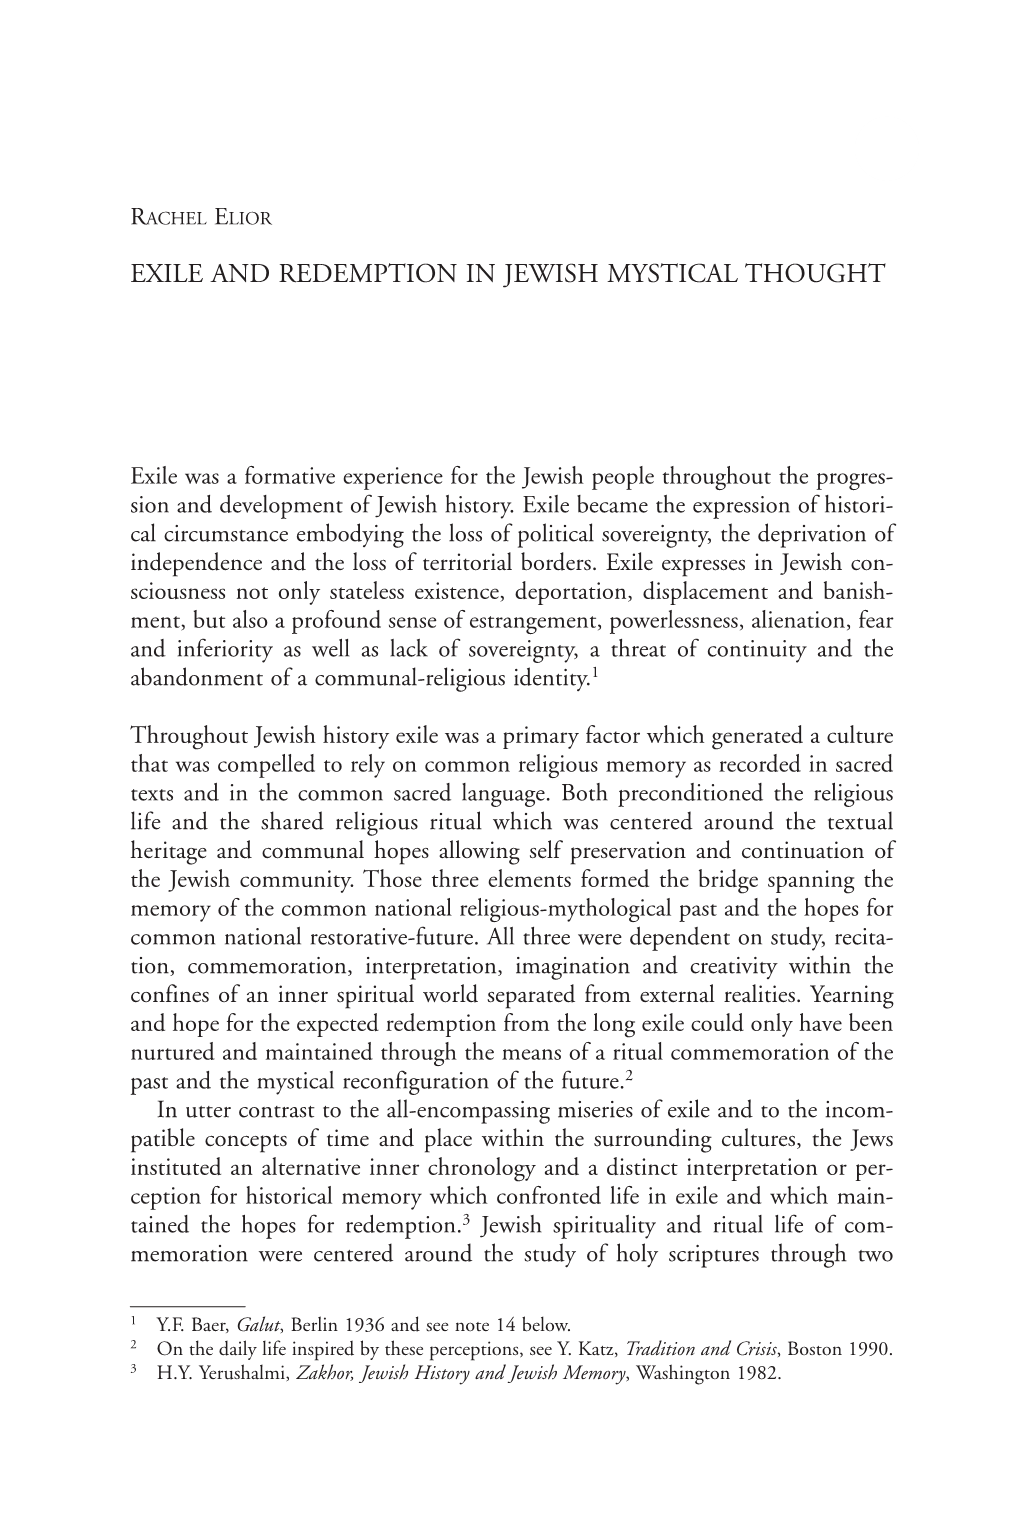 Exile and Redemption in Jewish Mystical Thought